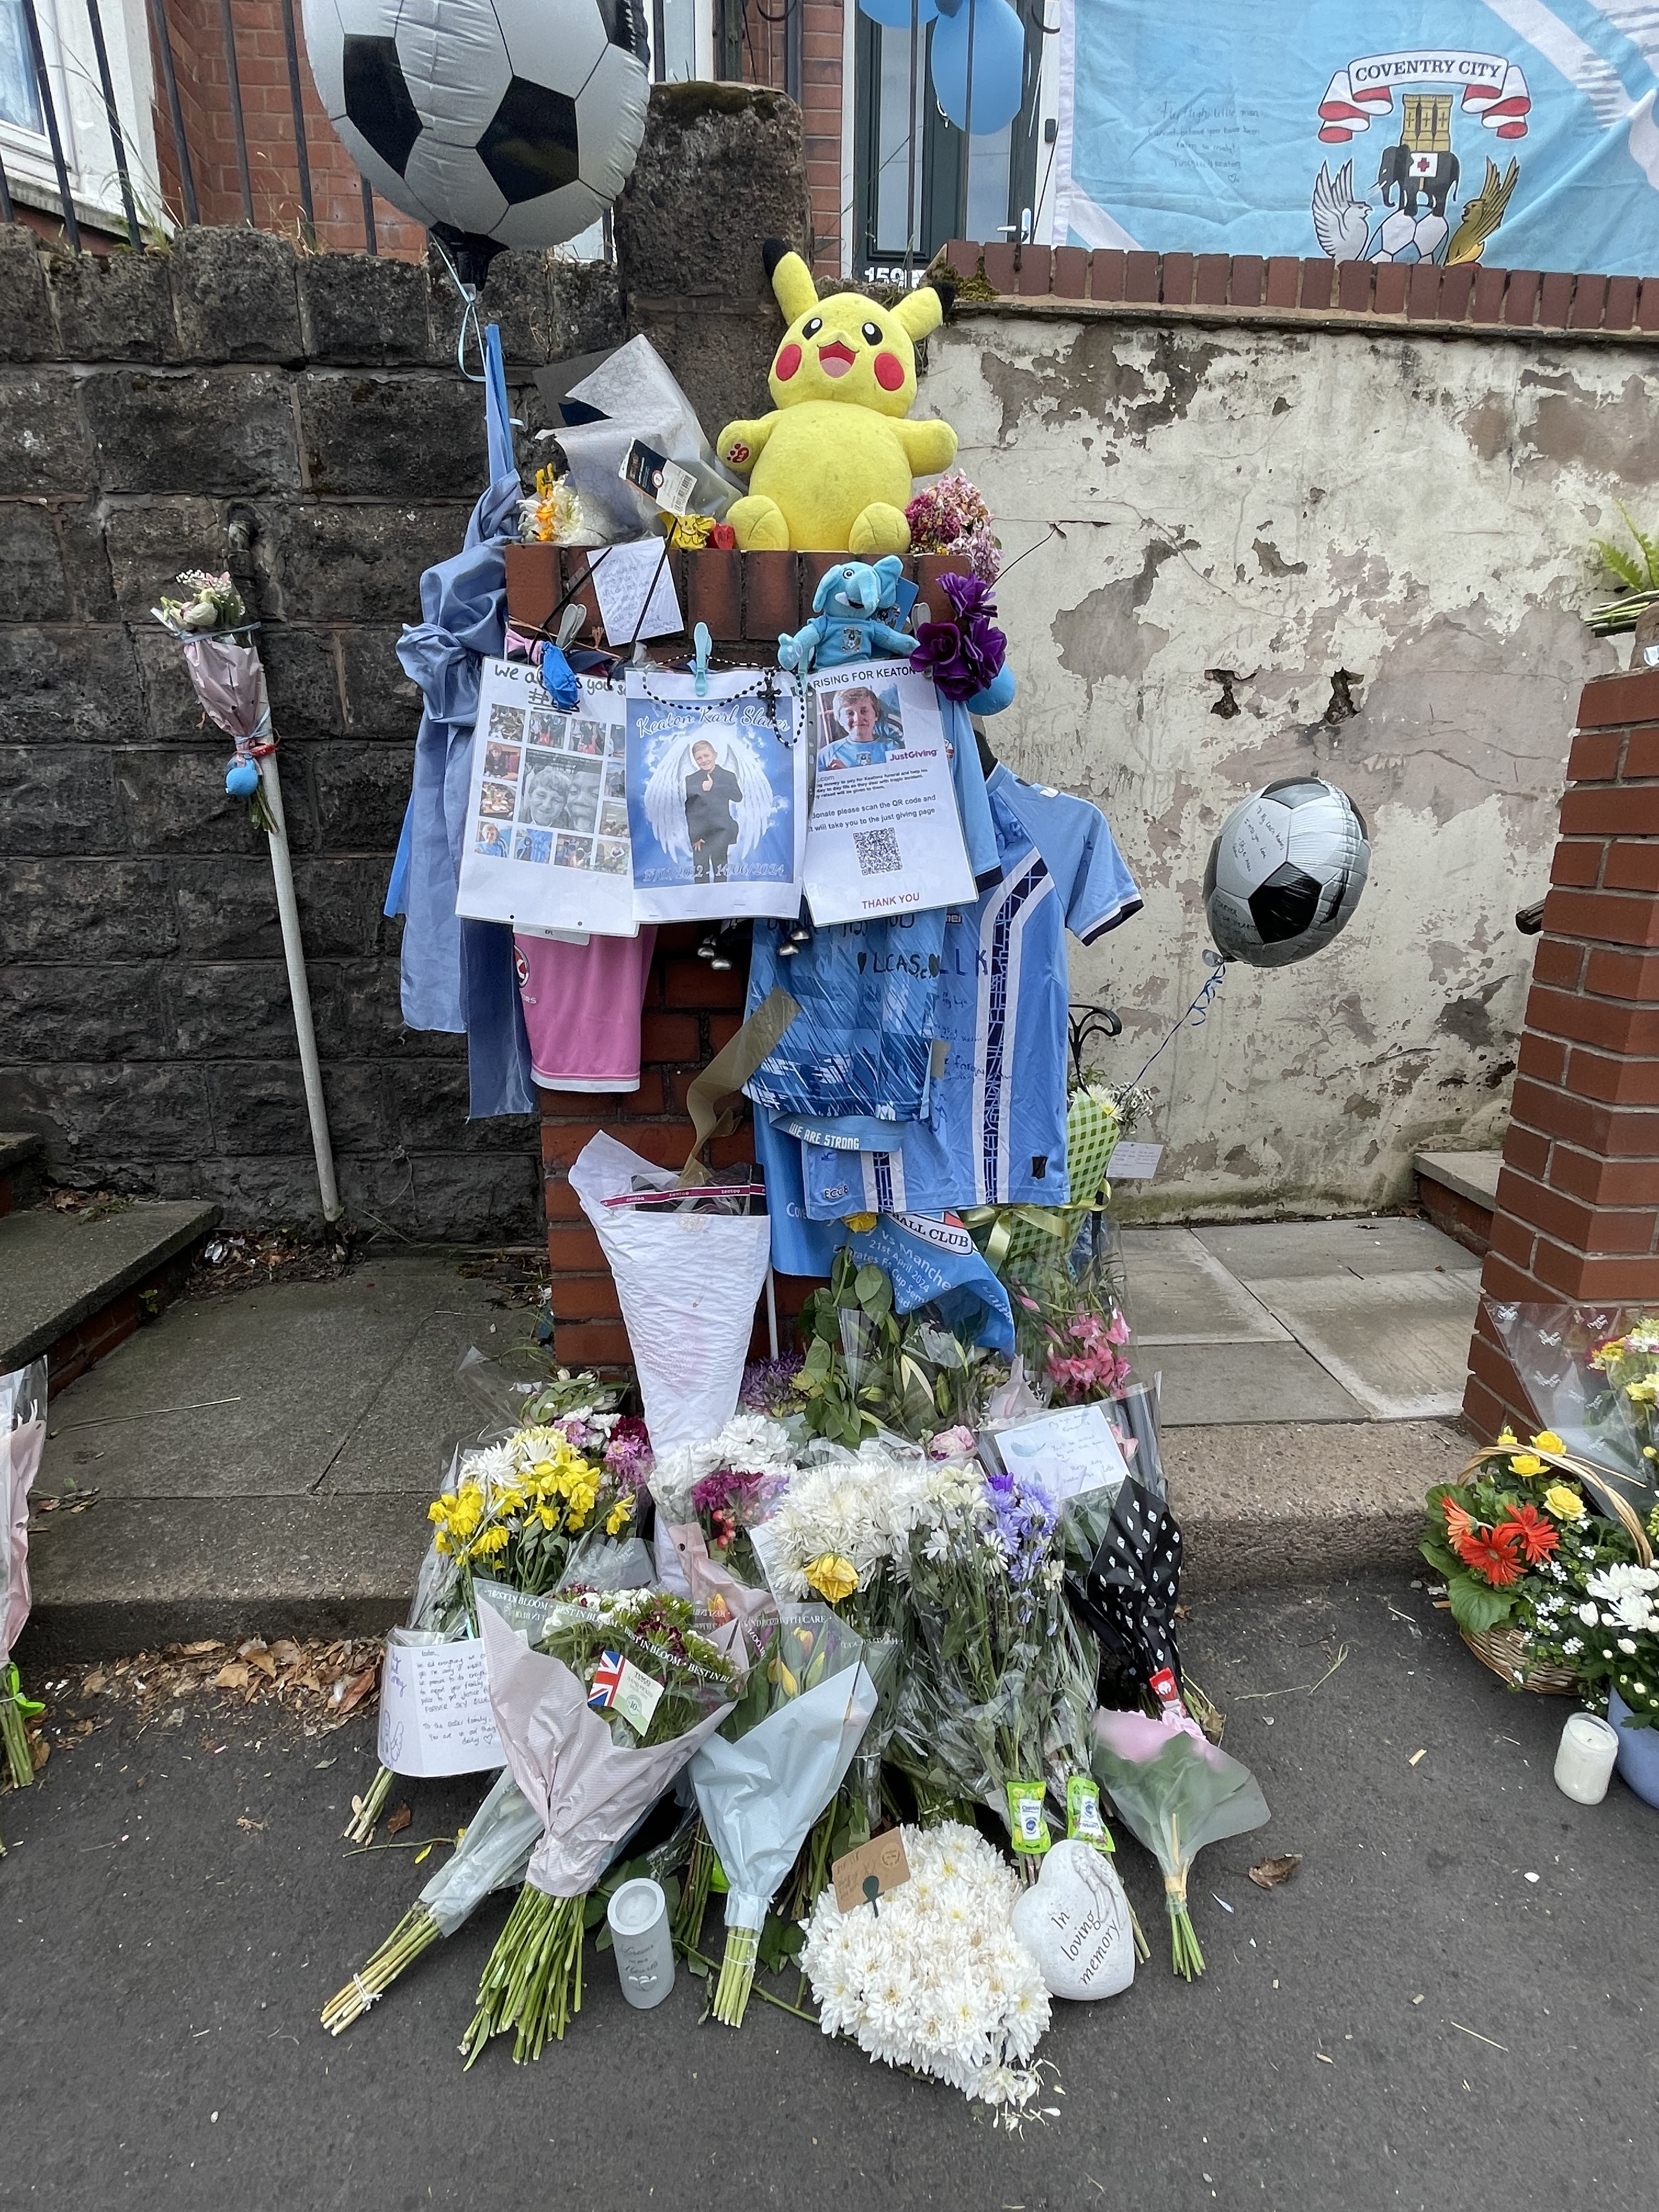 Flowers, balloons and teddies at the scene of a hit-and-run in memory of Keaton Slater